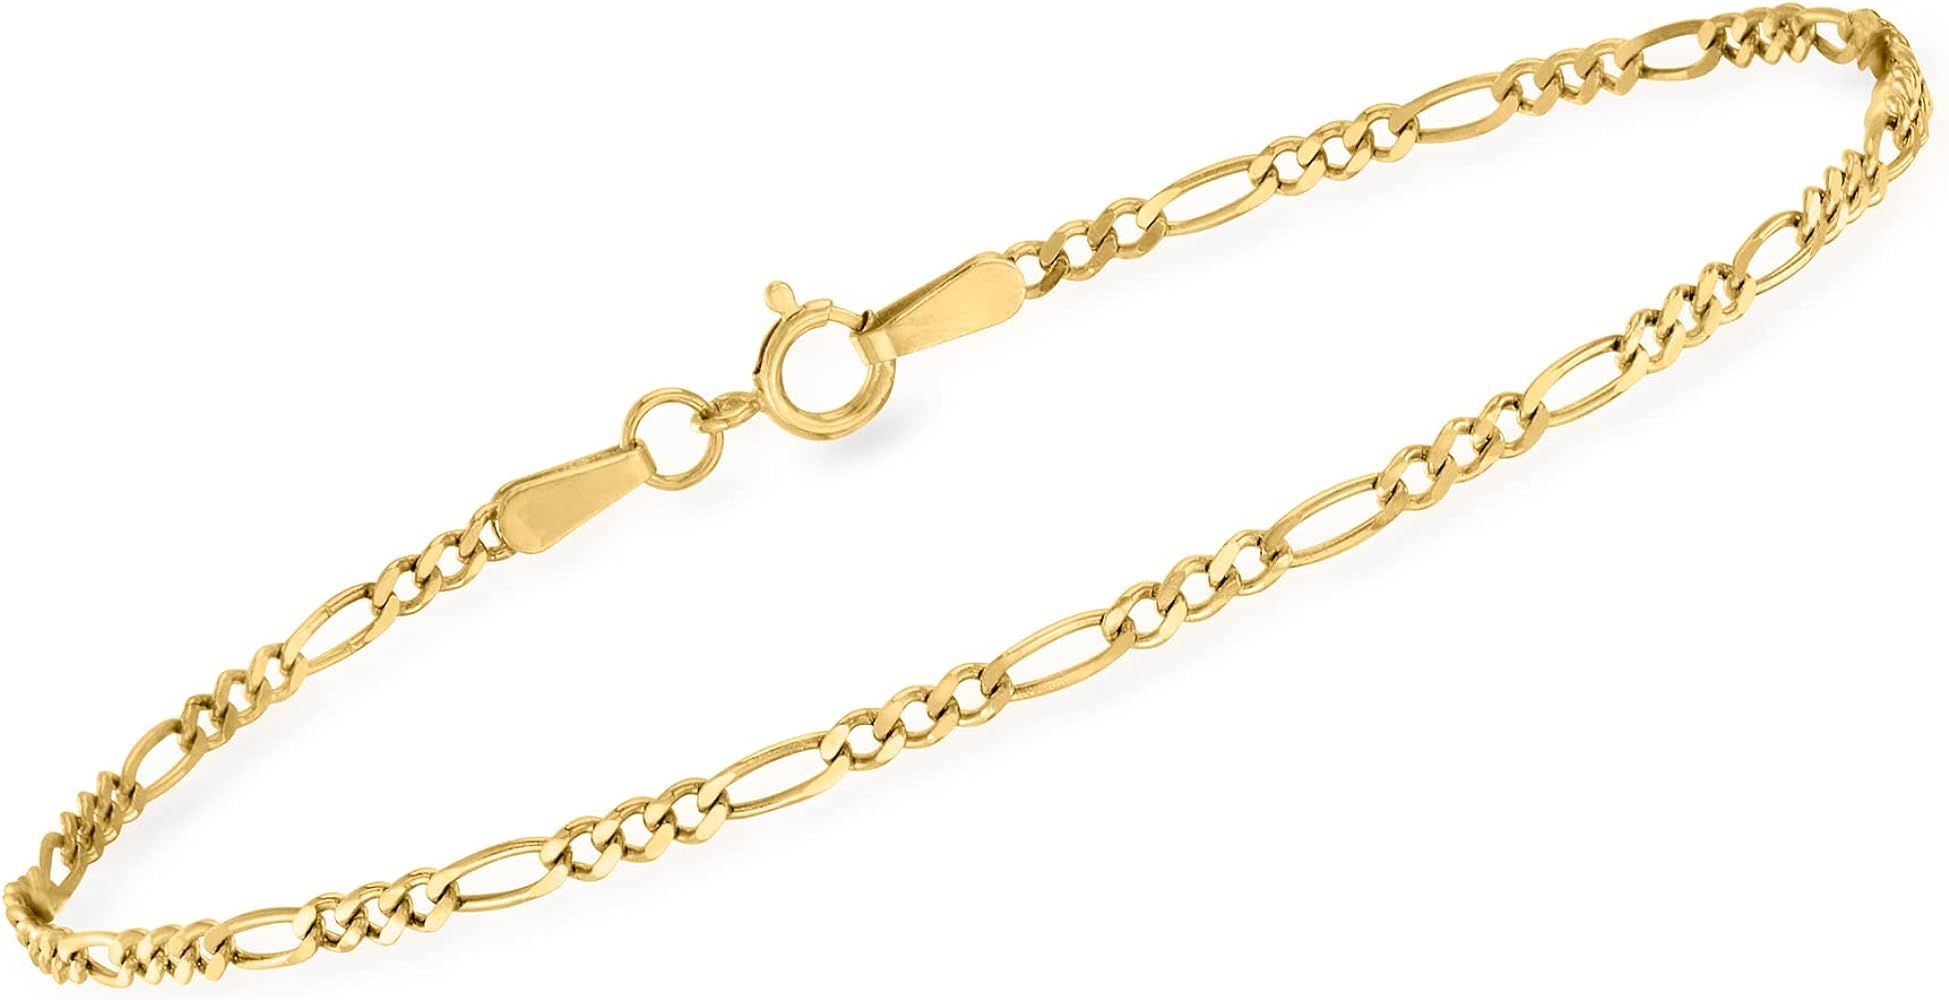 Ross-Simons RS Pure 1.9mm 14kt Yellow Gold Figaro-Link Bracelet. 7 inches | Amazon (US)